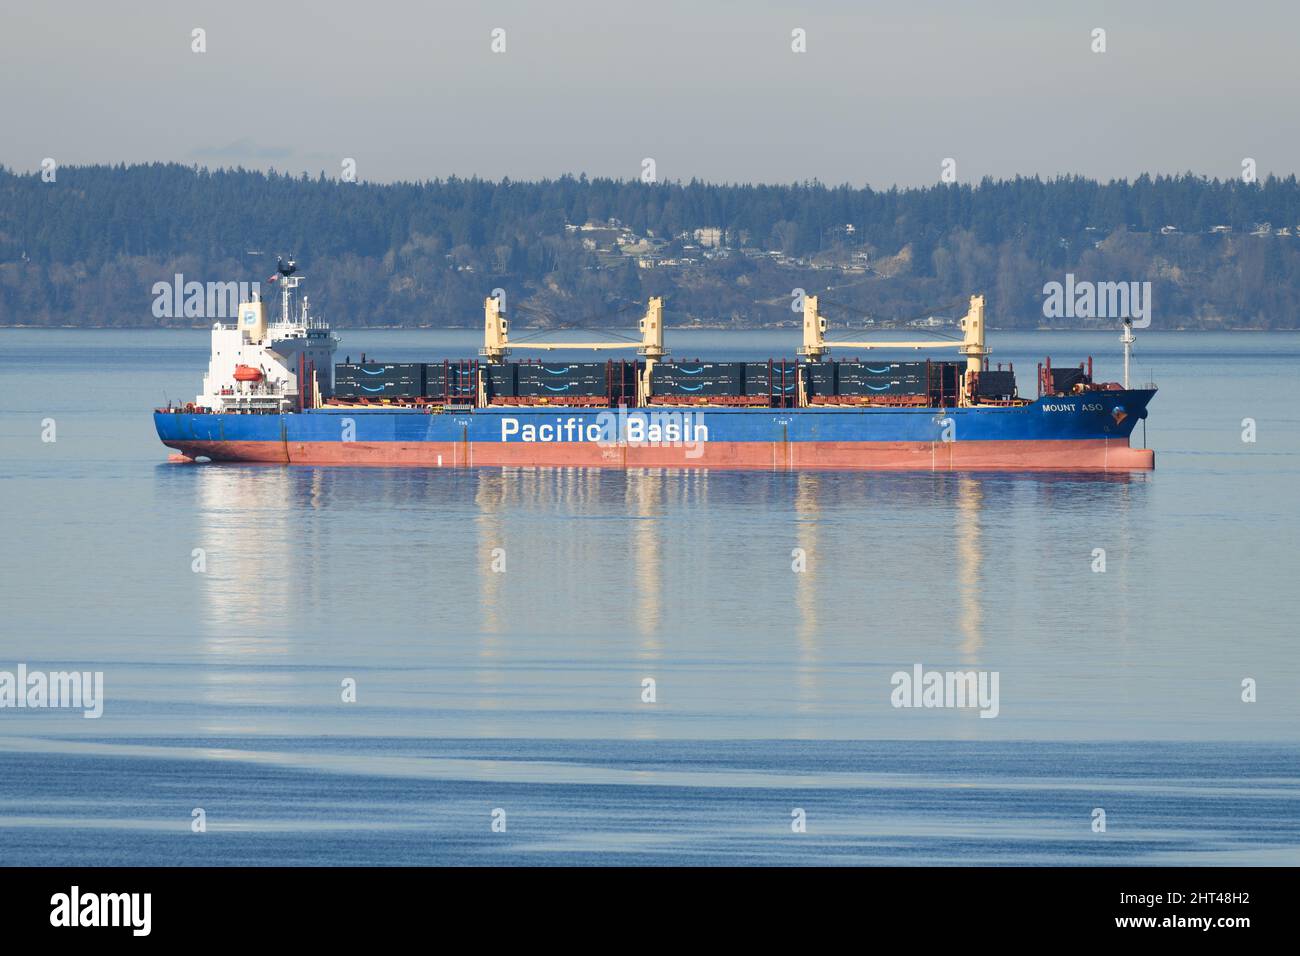 Everett, WA, USA - February 25, 2022; Mount Aso of the Pacific Basin Shipping HK LTD company with a cargo of Amazon Prime branded shipping containers Stock Photo